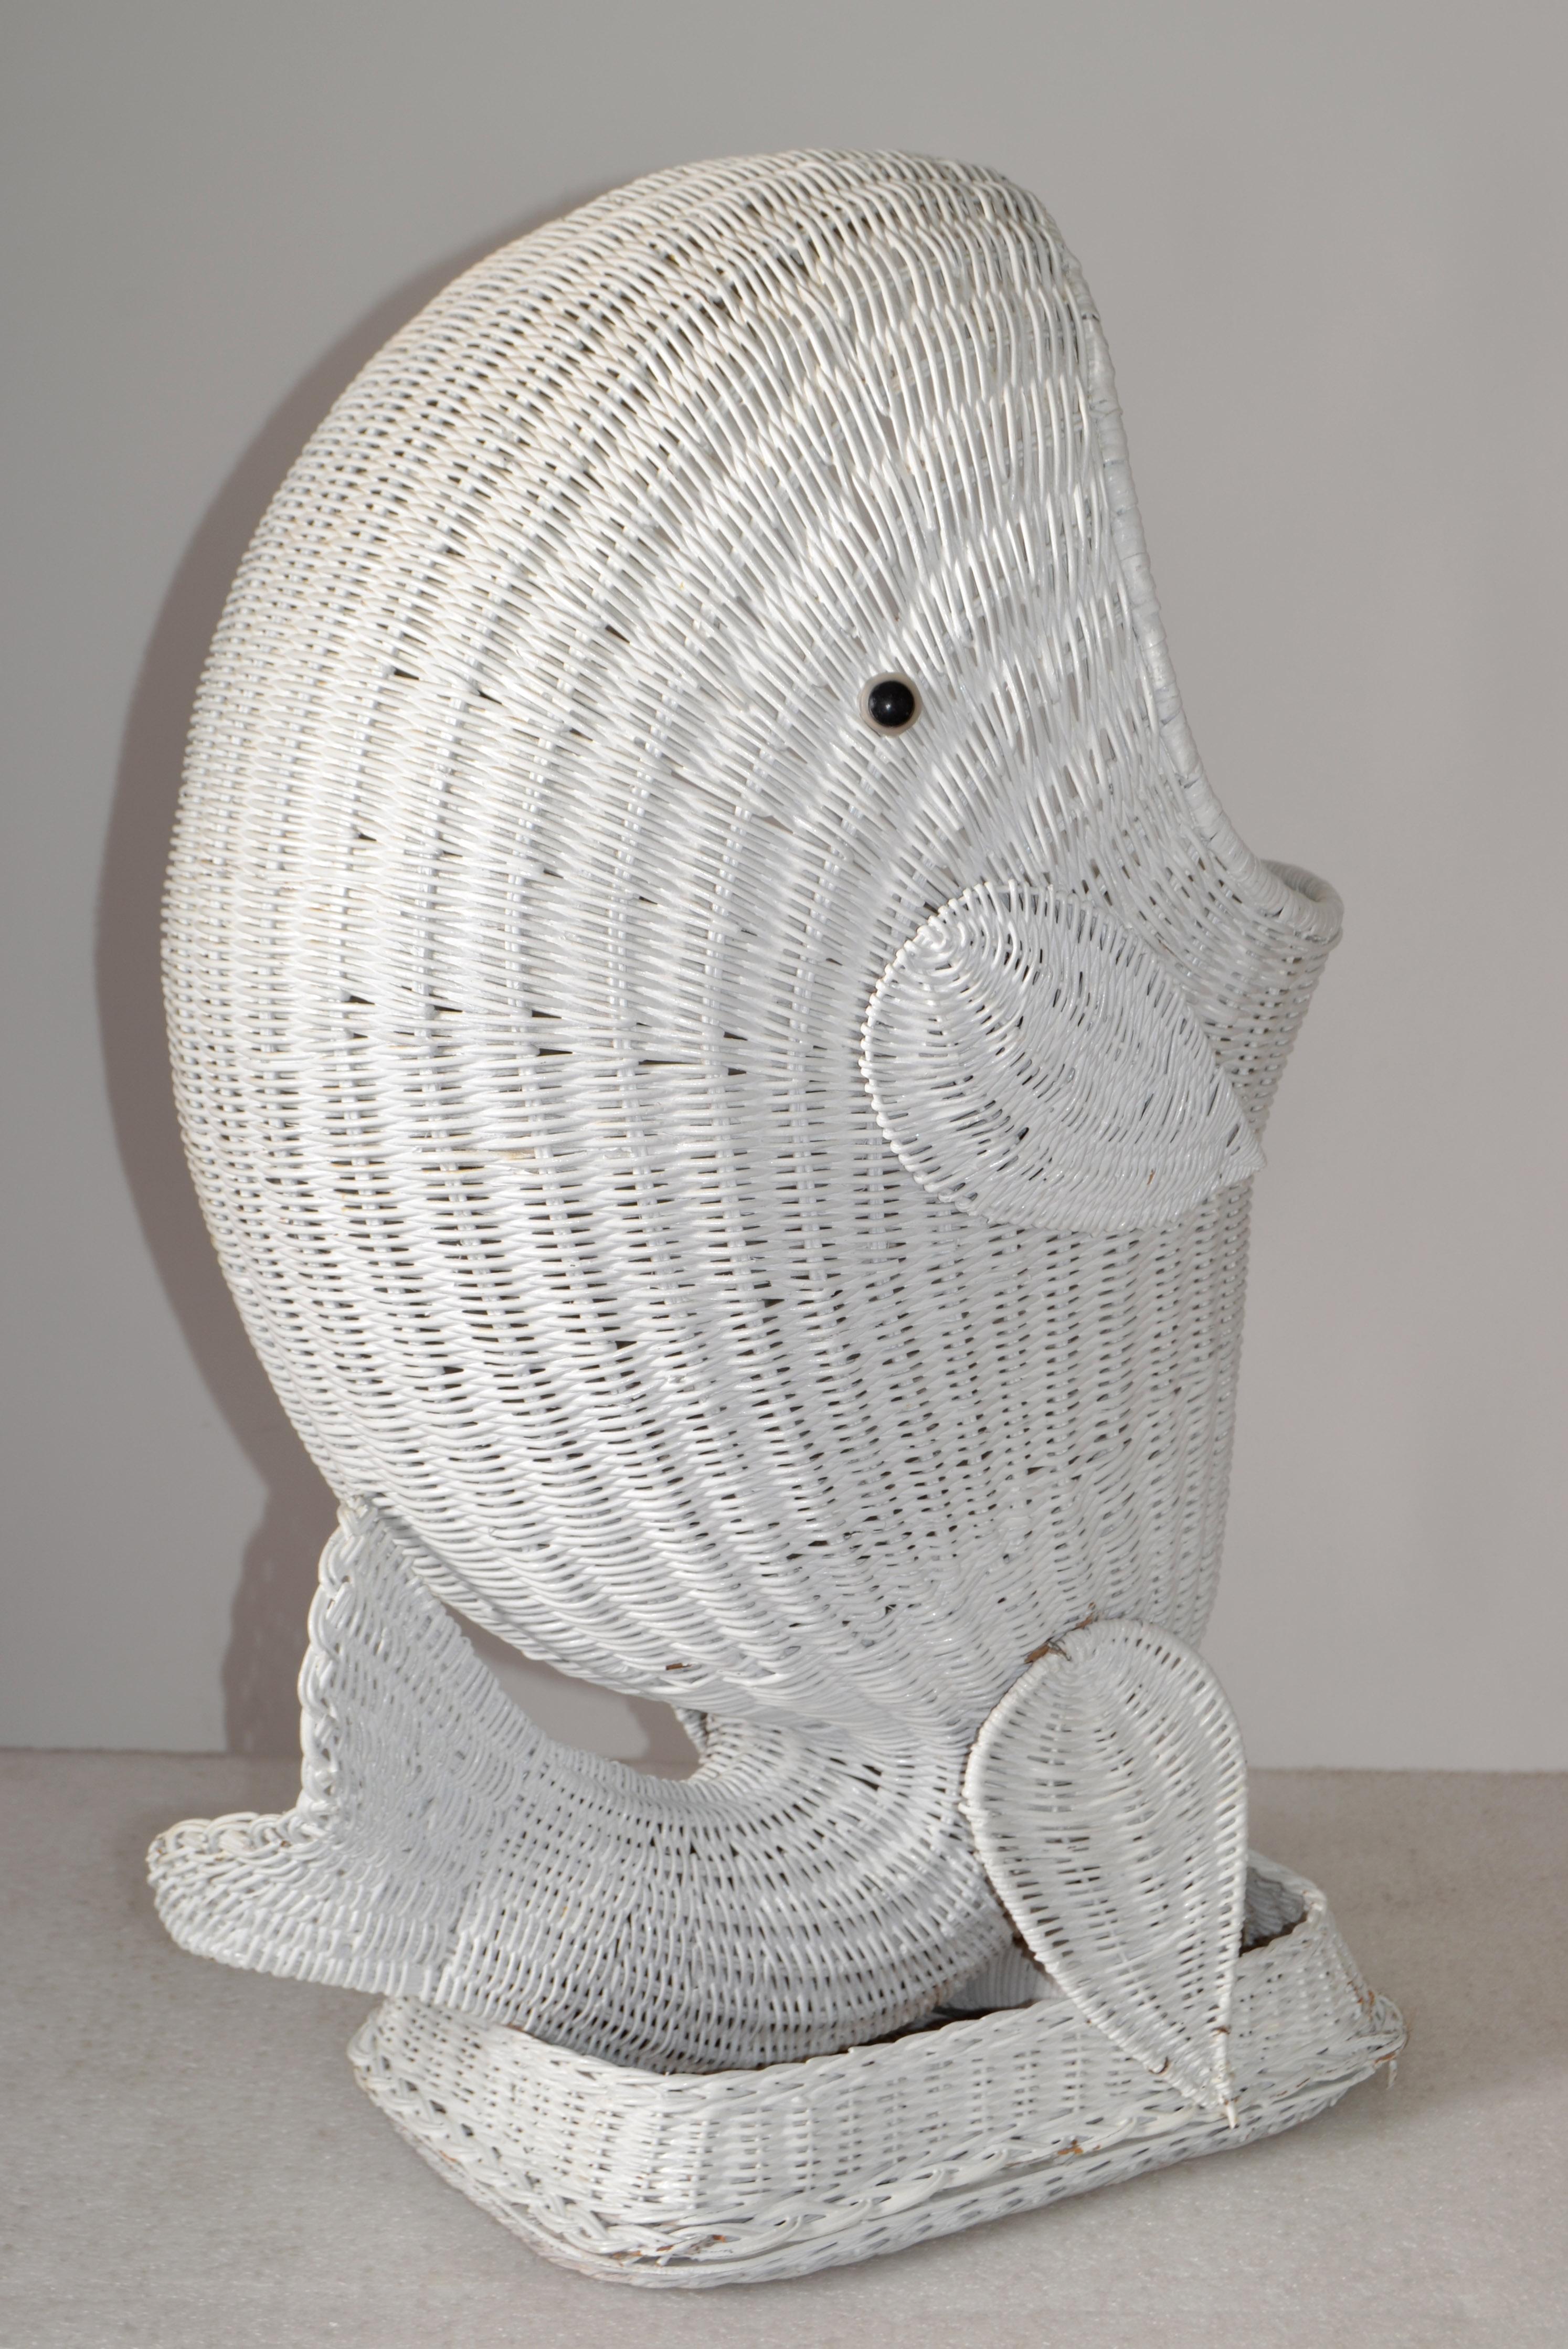 White Hand-Woven Rattan Dolphin Storage Toy Basket Sculpture 1970 Bohemian Chic For Sale 2